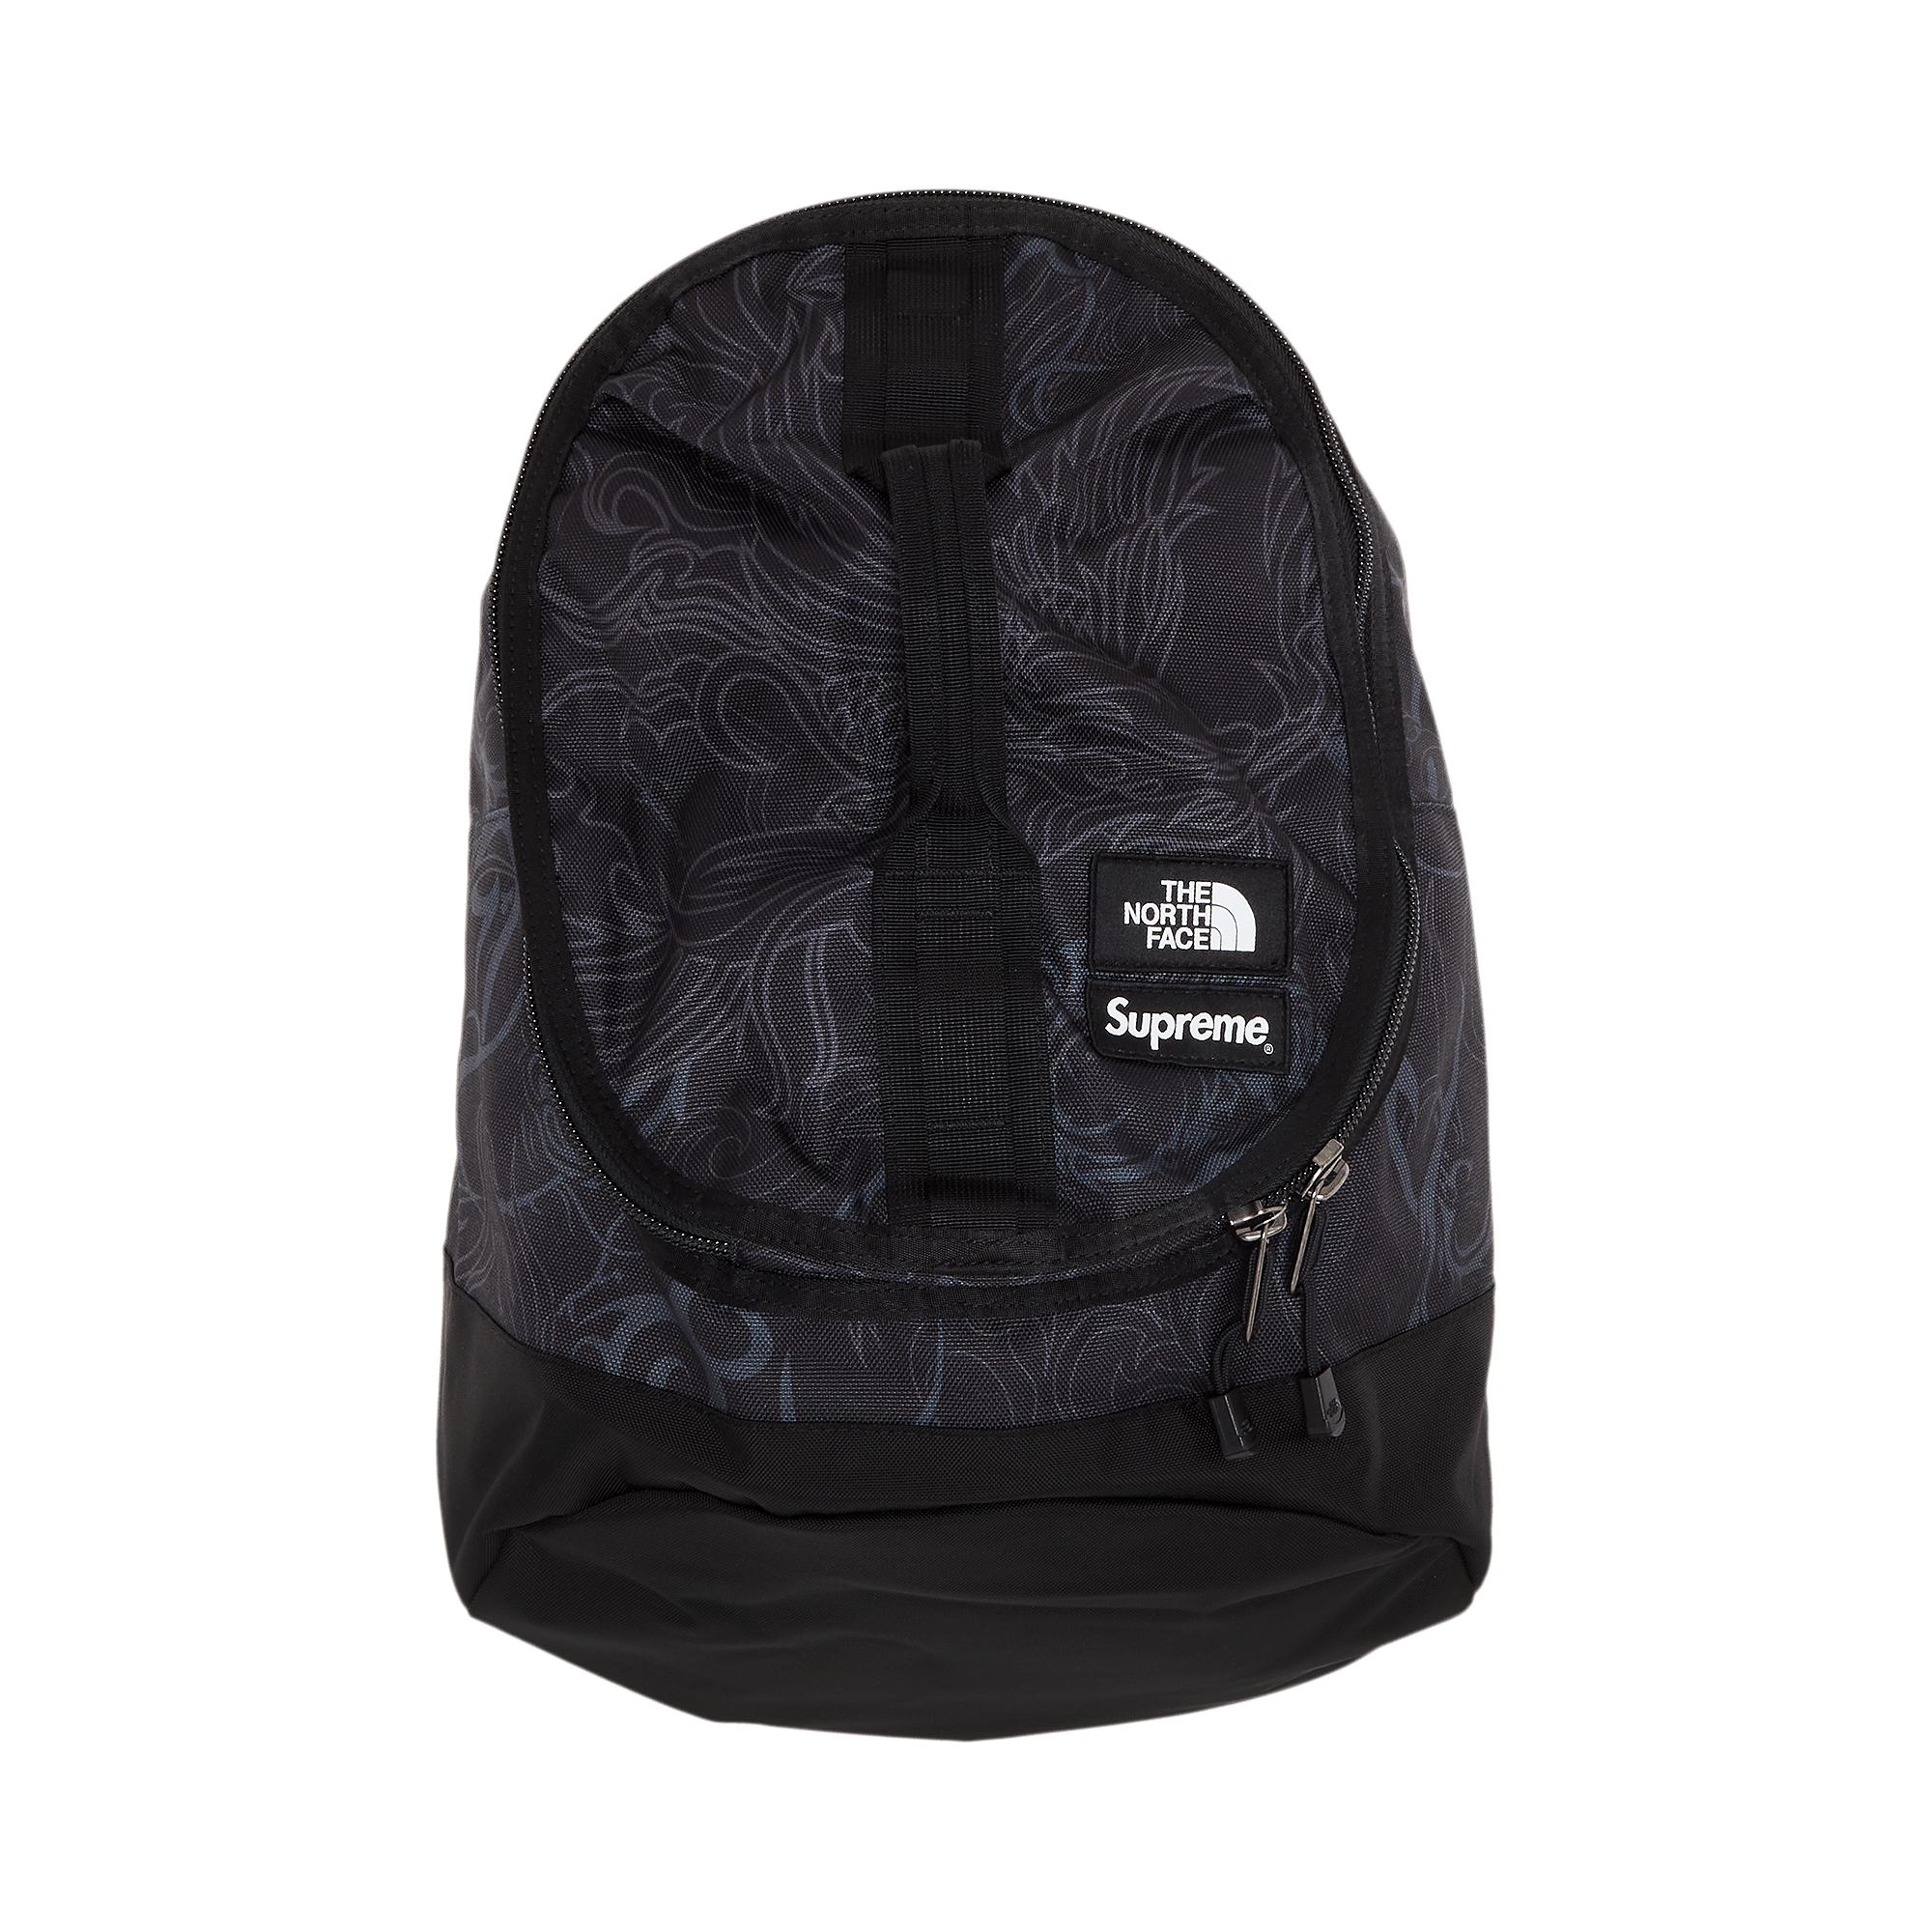 Supreme X The North Face Steep Tech Backpack 'black Dragon' for